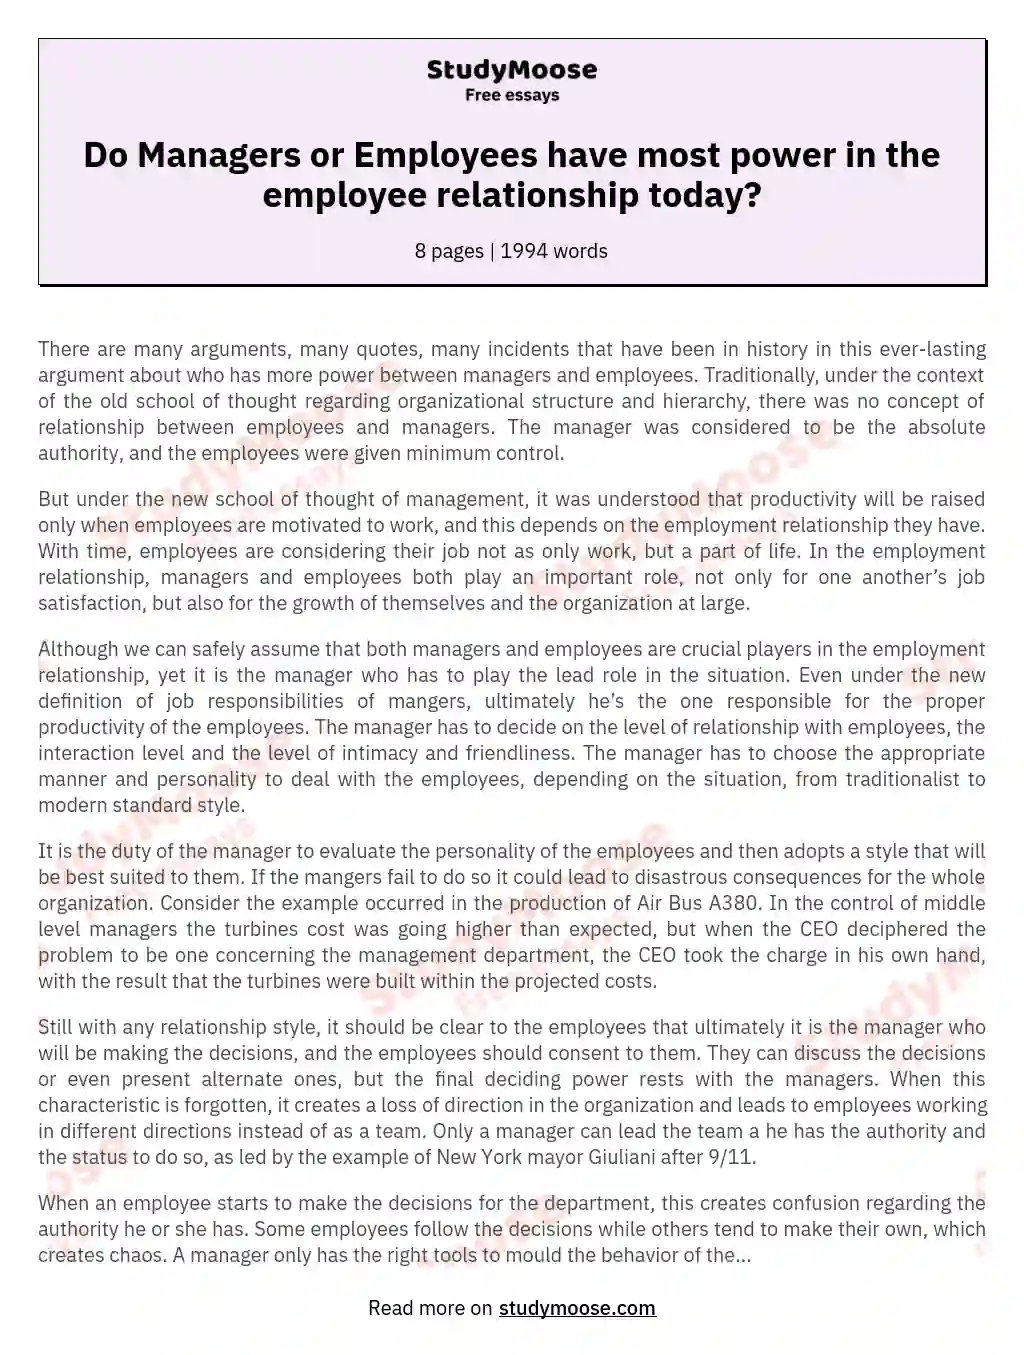 Do Managers or Employees have most power in the employee relationship today? essay